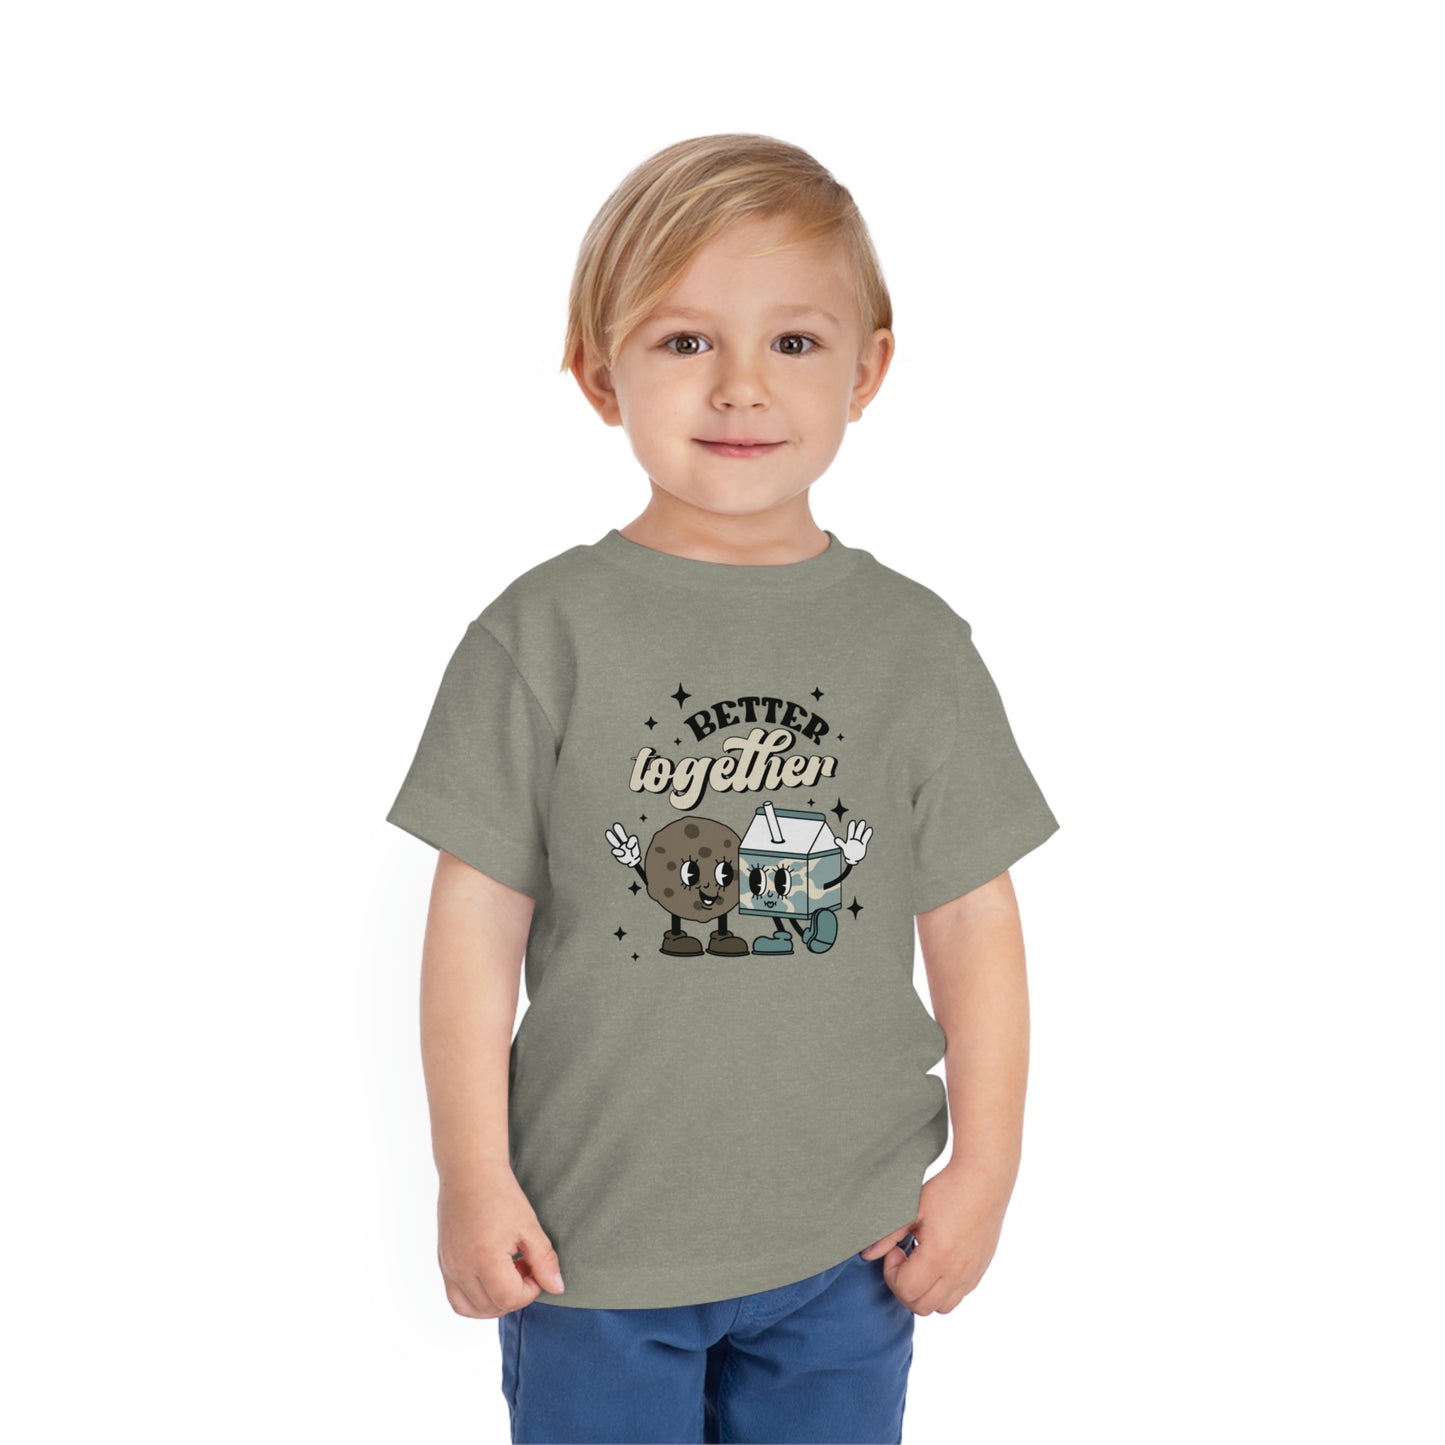 "Better Together" Toddler Short Sleeve Tee (2T-5T)